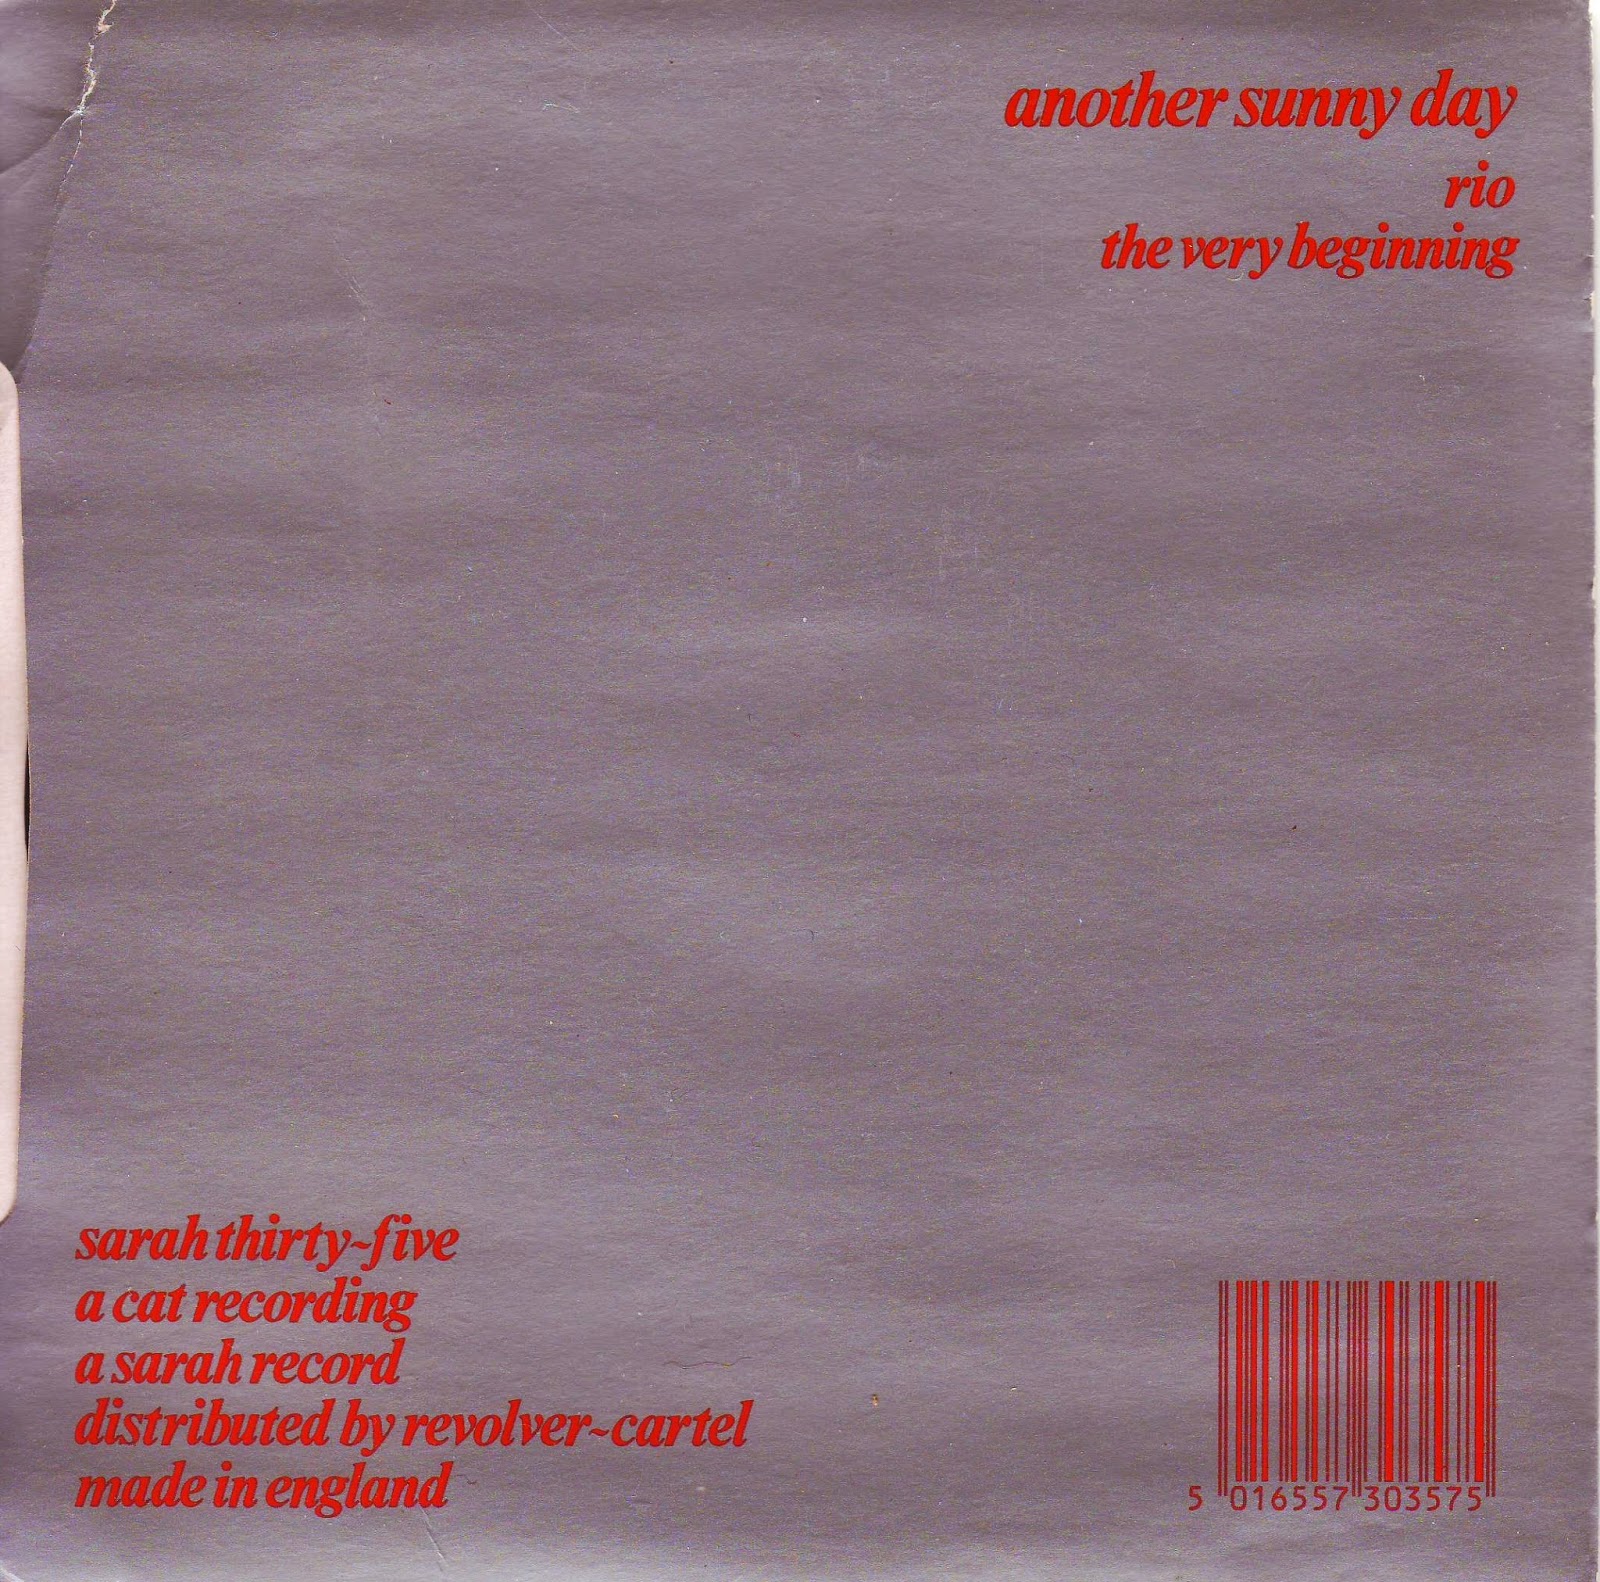 Swinging Singles Club: Another Sunny Day